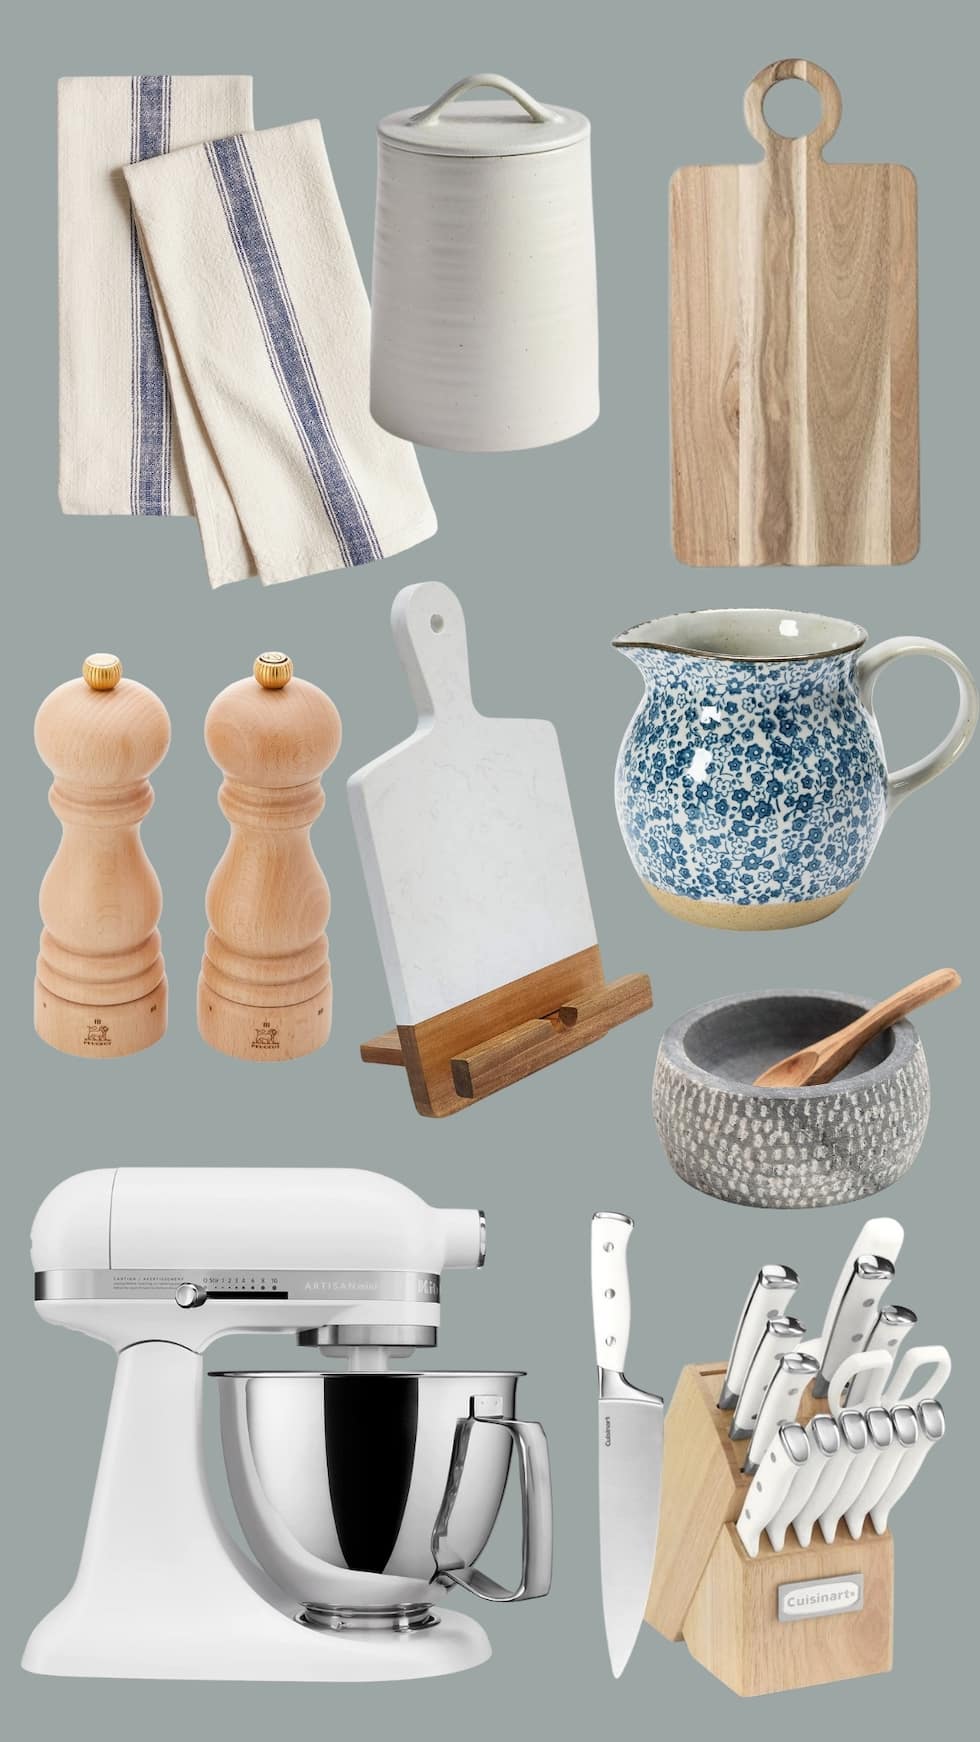 Get the Look - Kitchen Decorating Sources